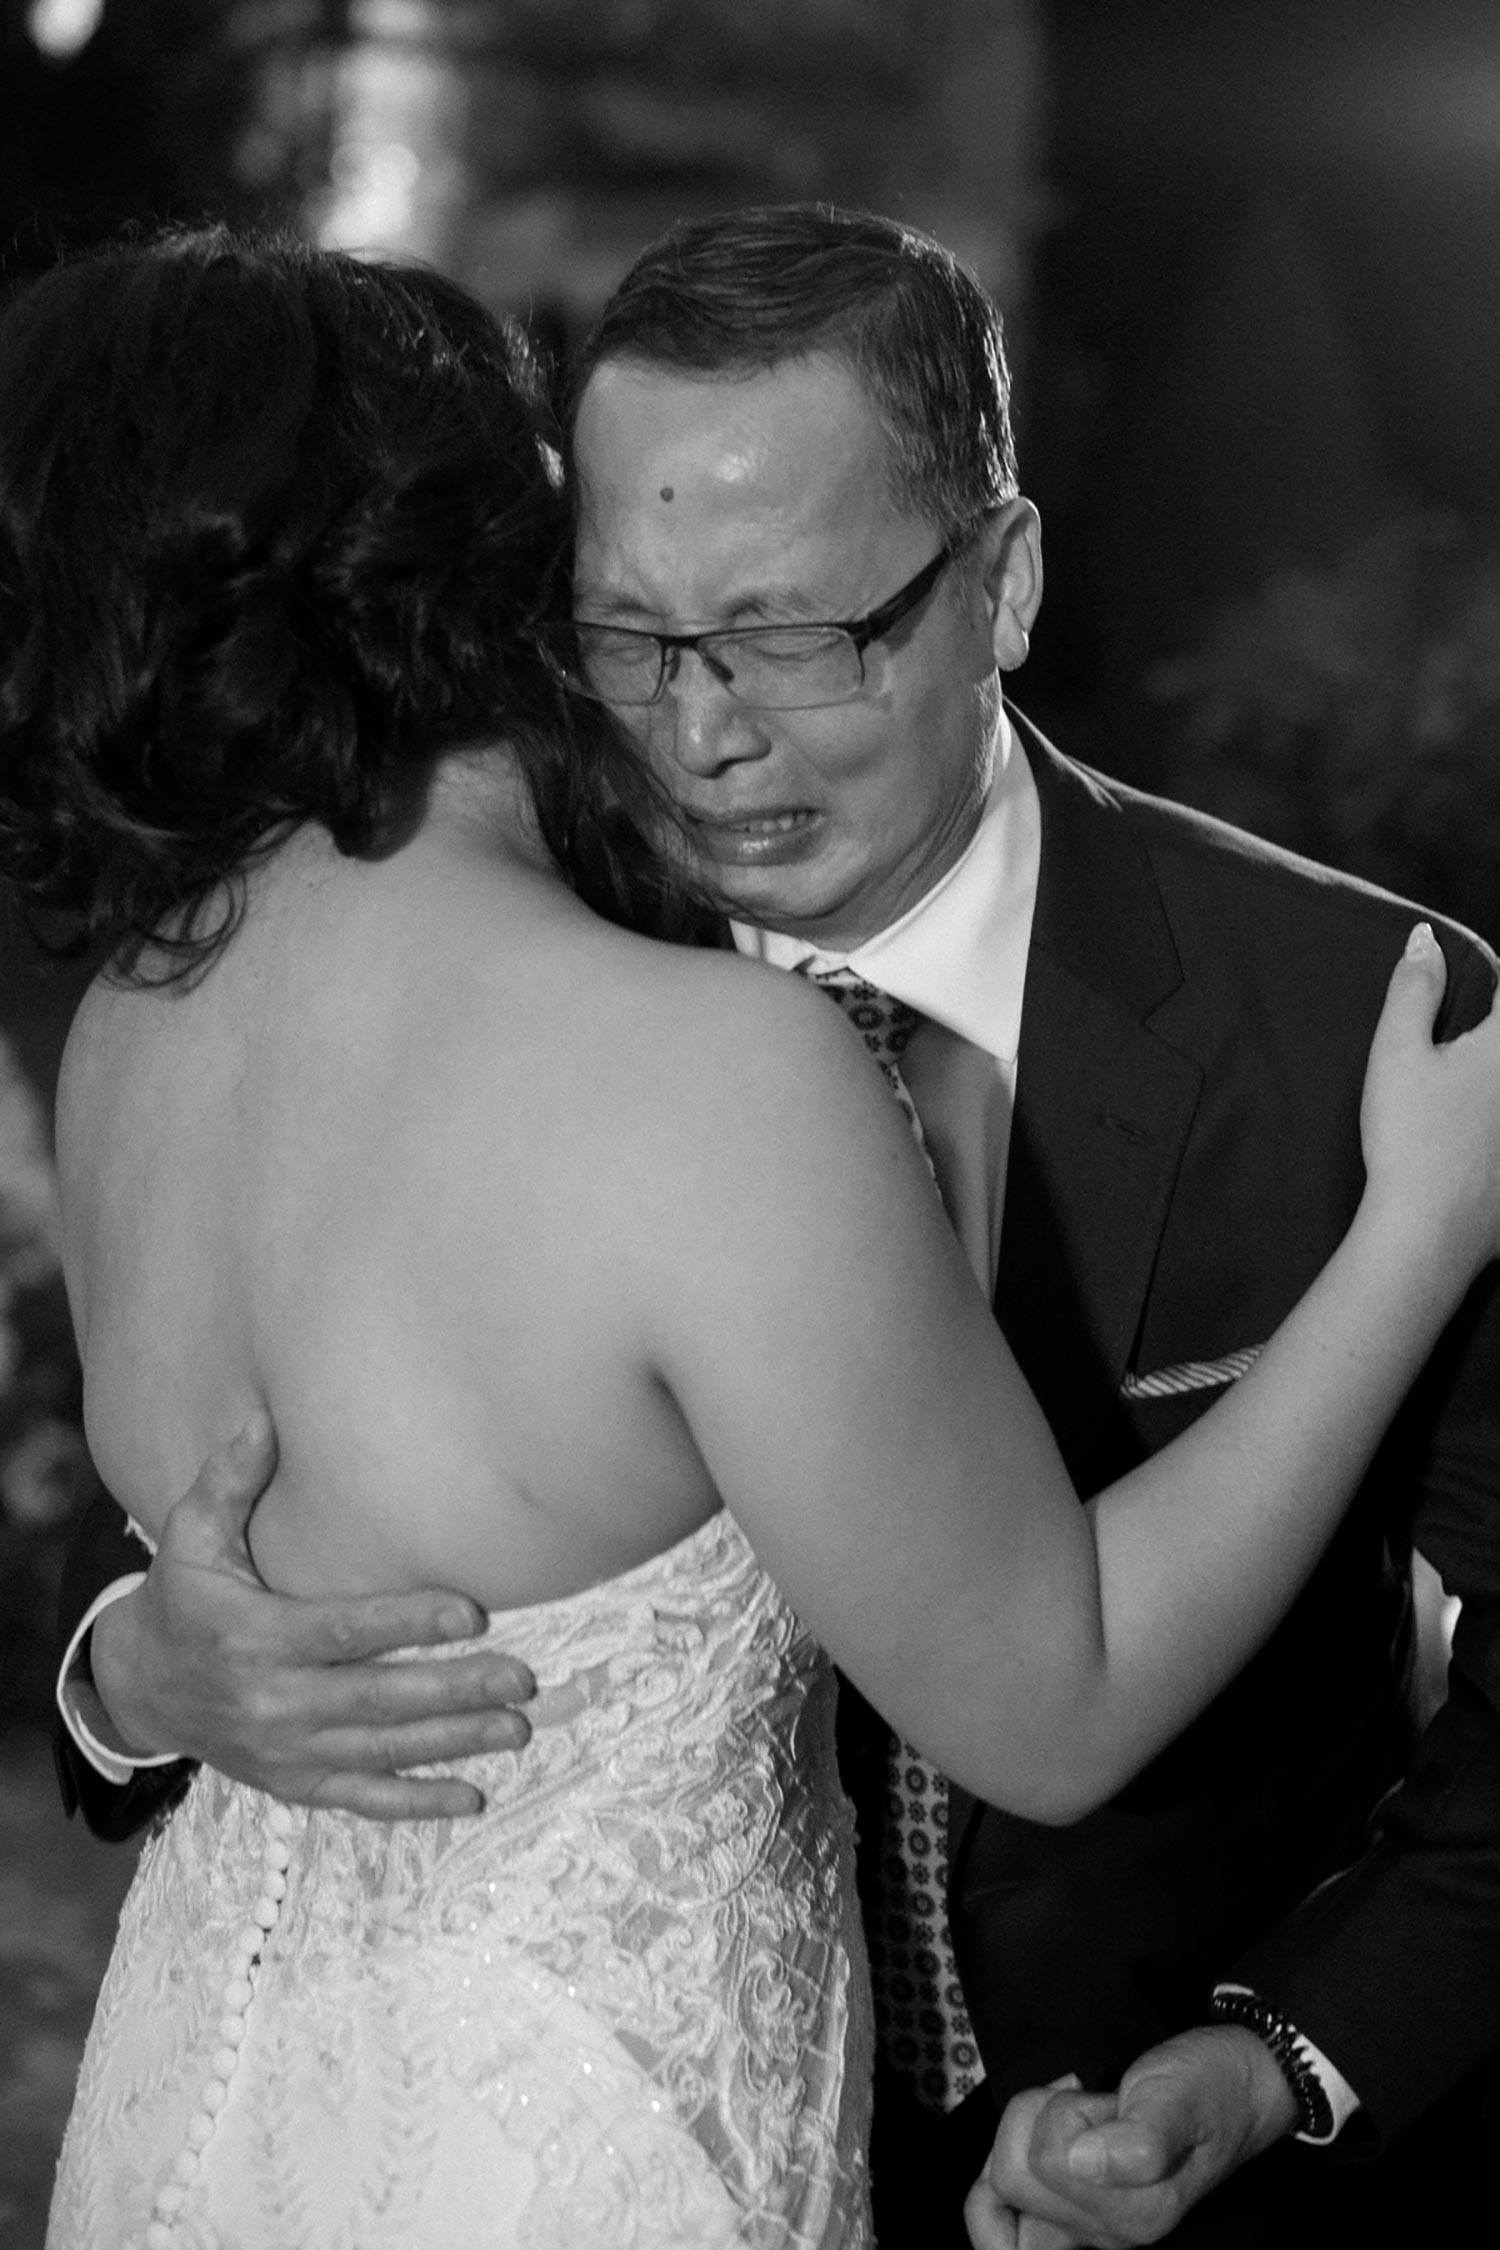 emotional father/daughter dance for a wedding